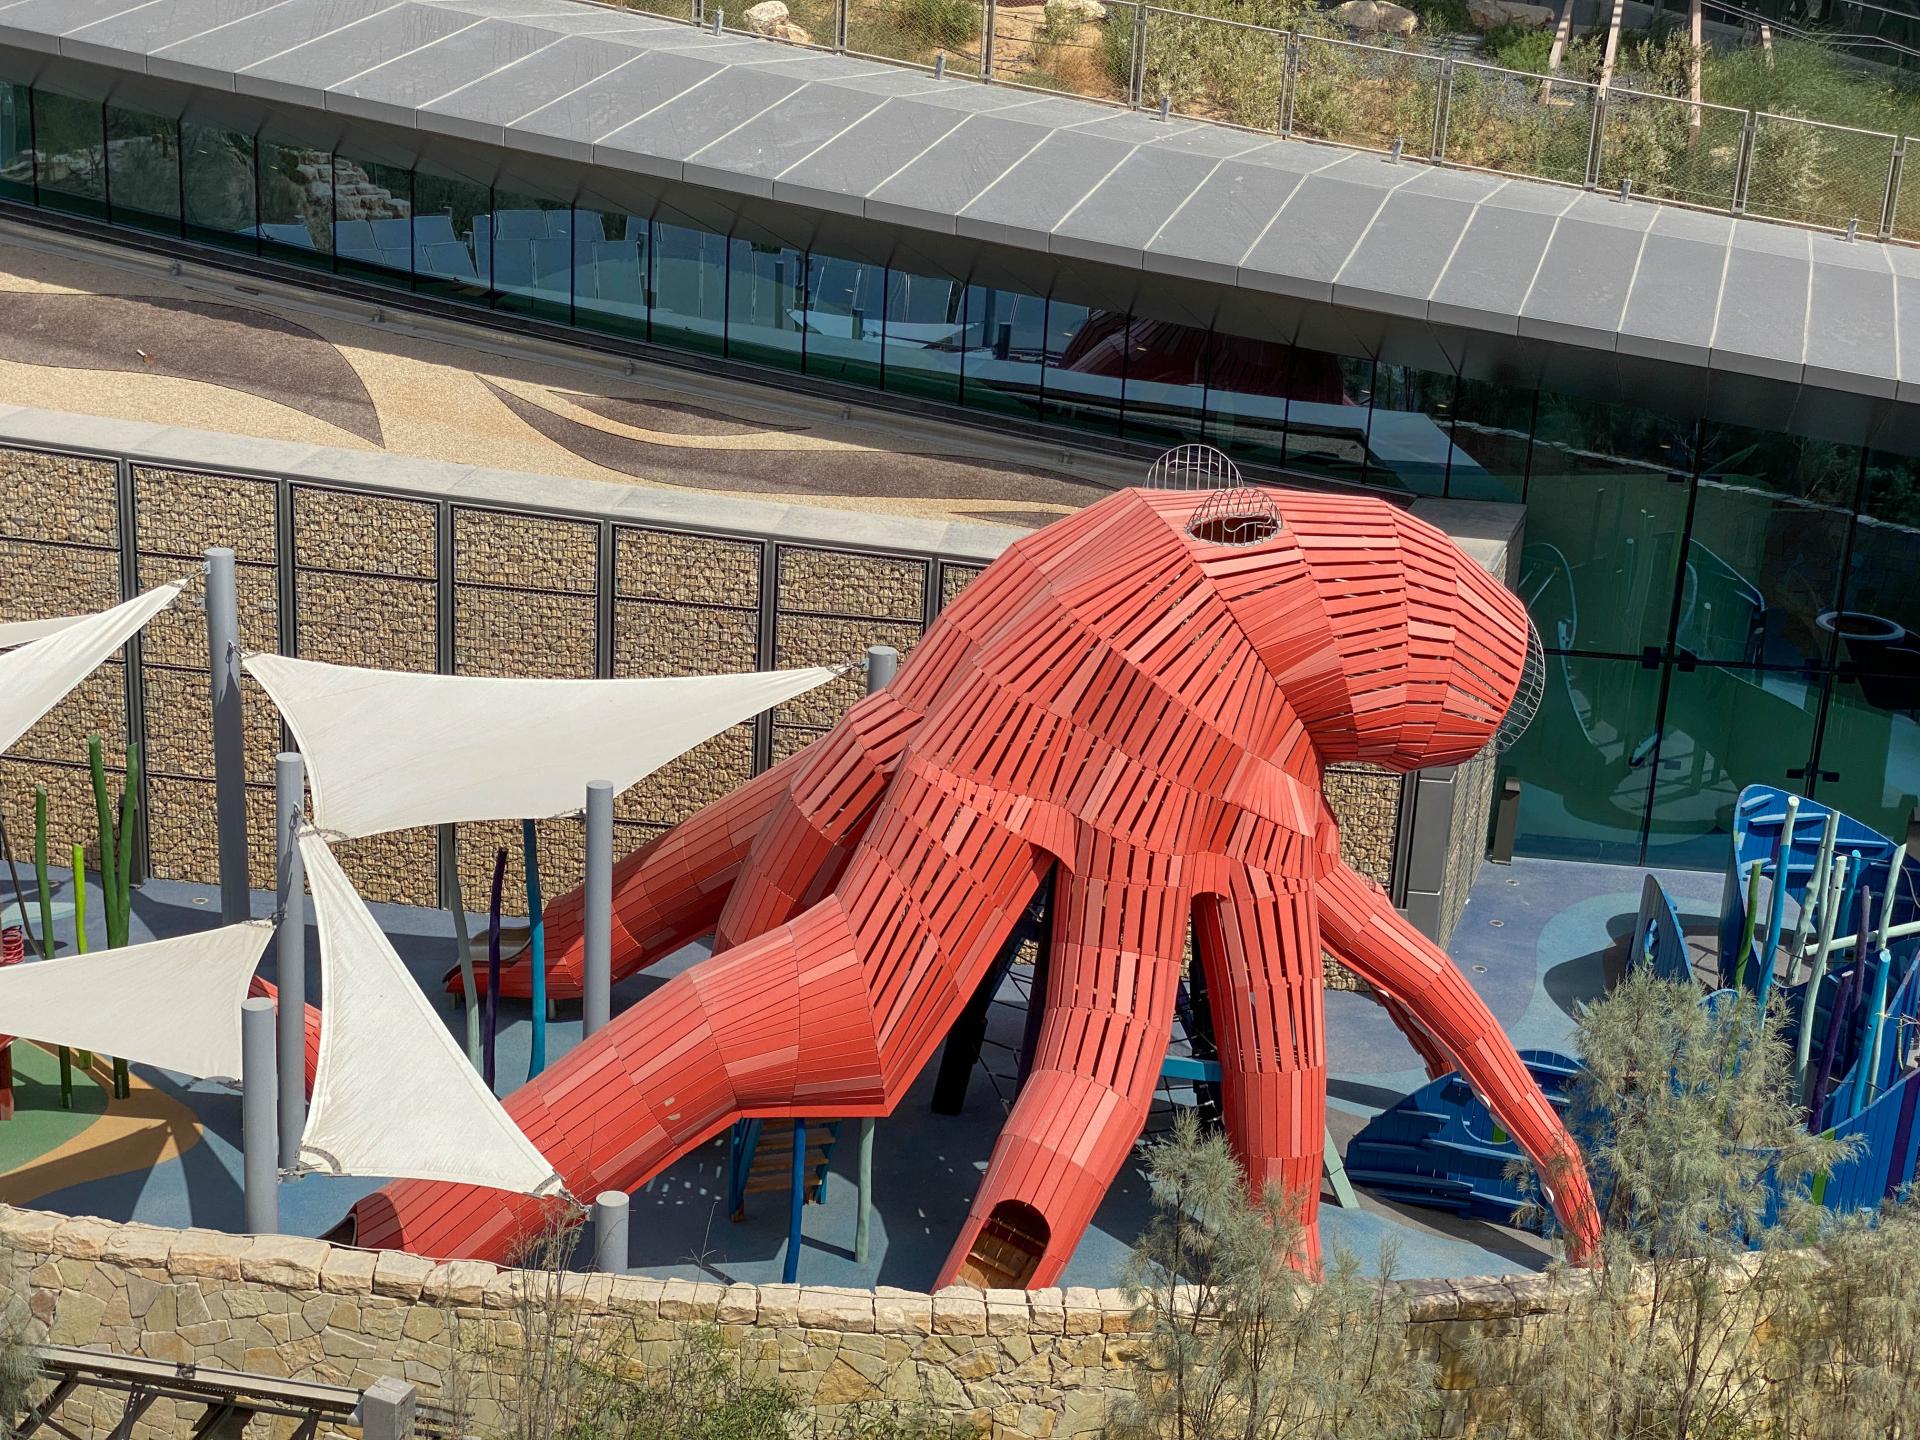 Octopus playground at EXPO 2020 - MONSTRUM playgrounds